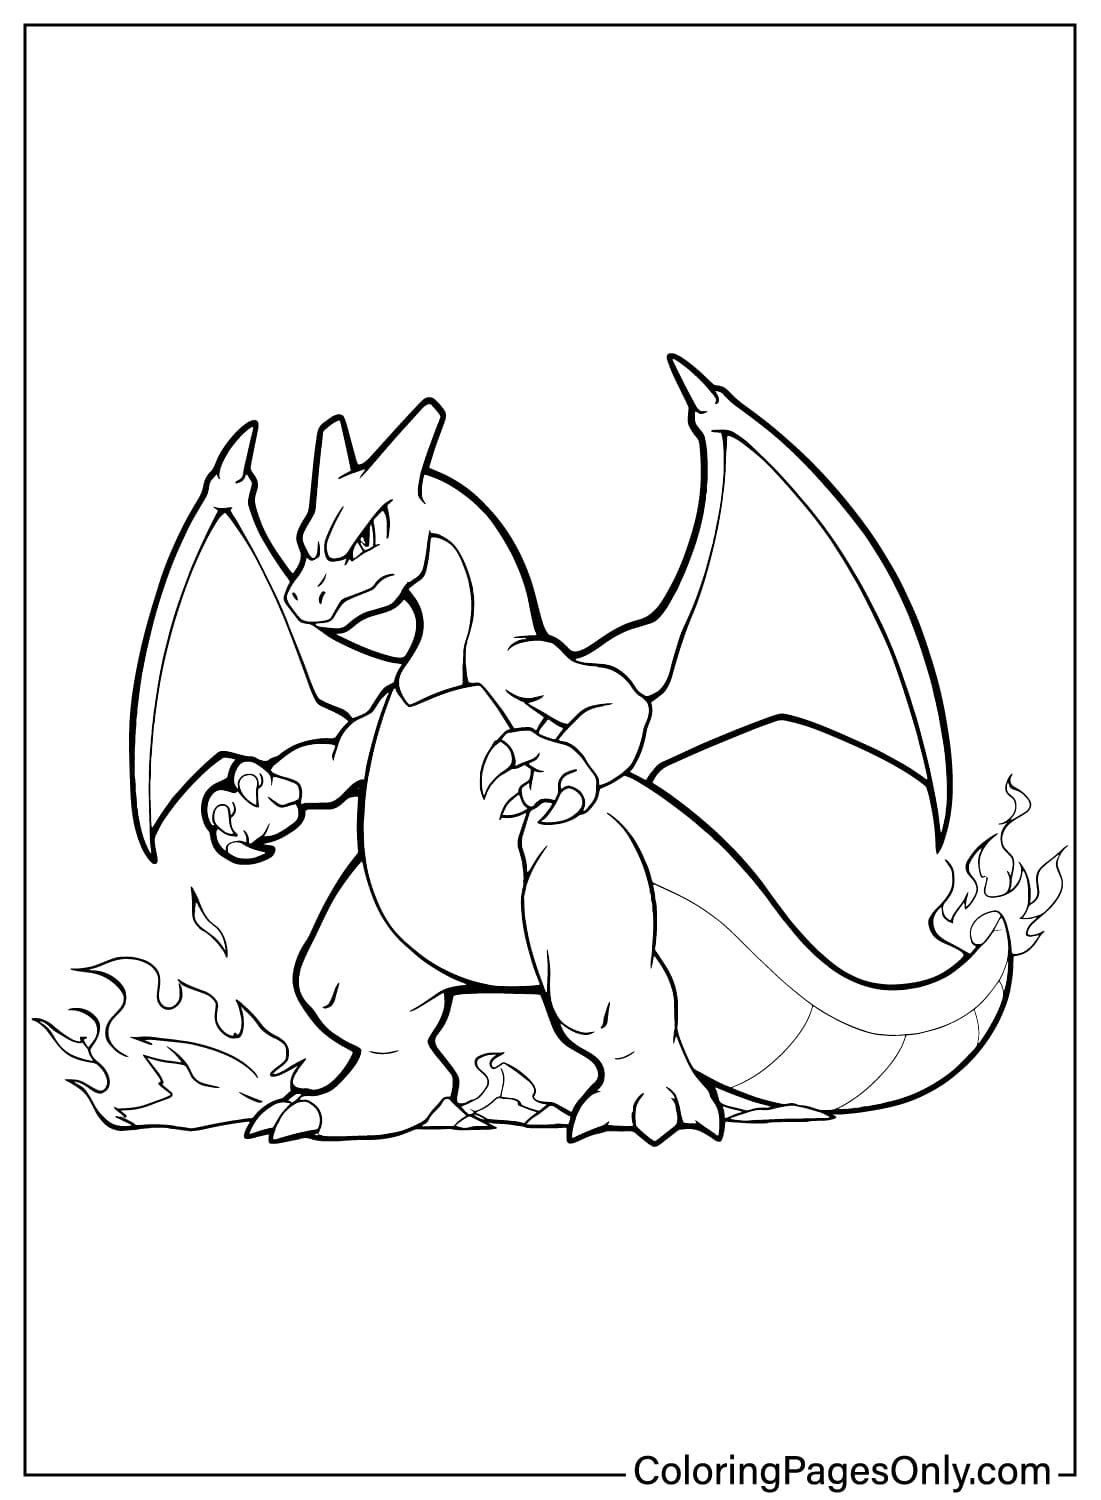 Charizard Coloring Page from Charizard